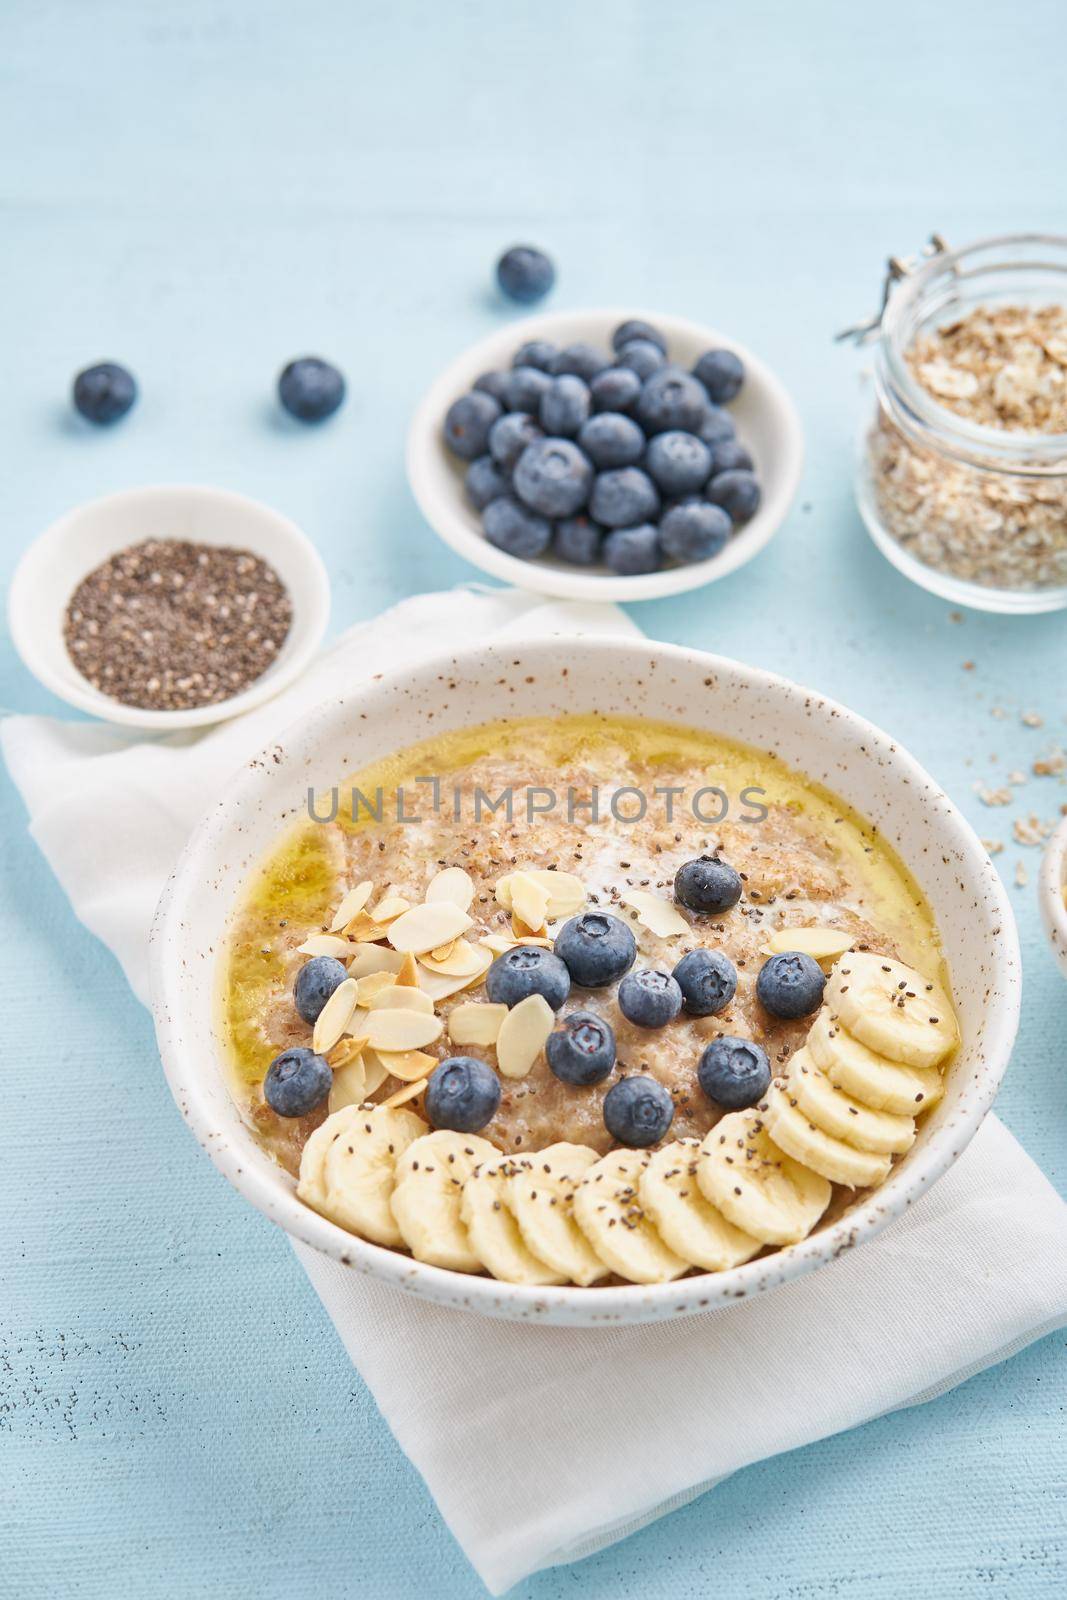 Oatmeal with blueberries, banana on blue light background. Side view, vertical. Healthy diet breakfast